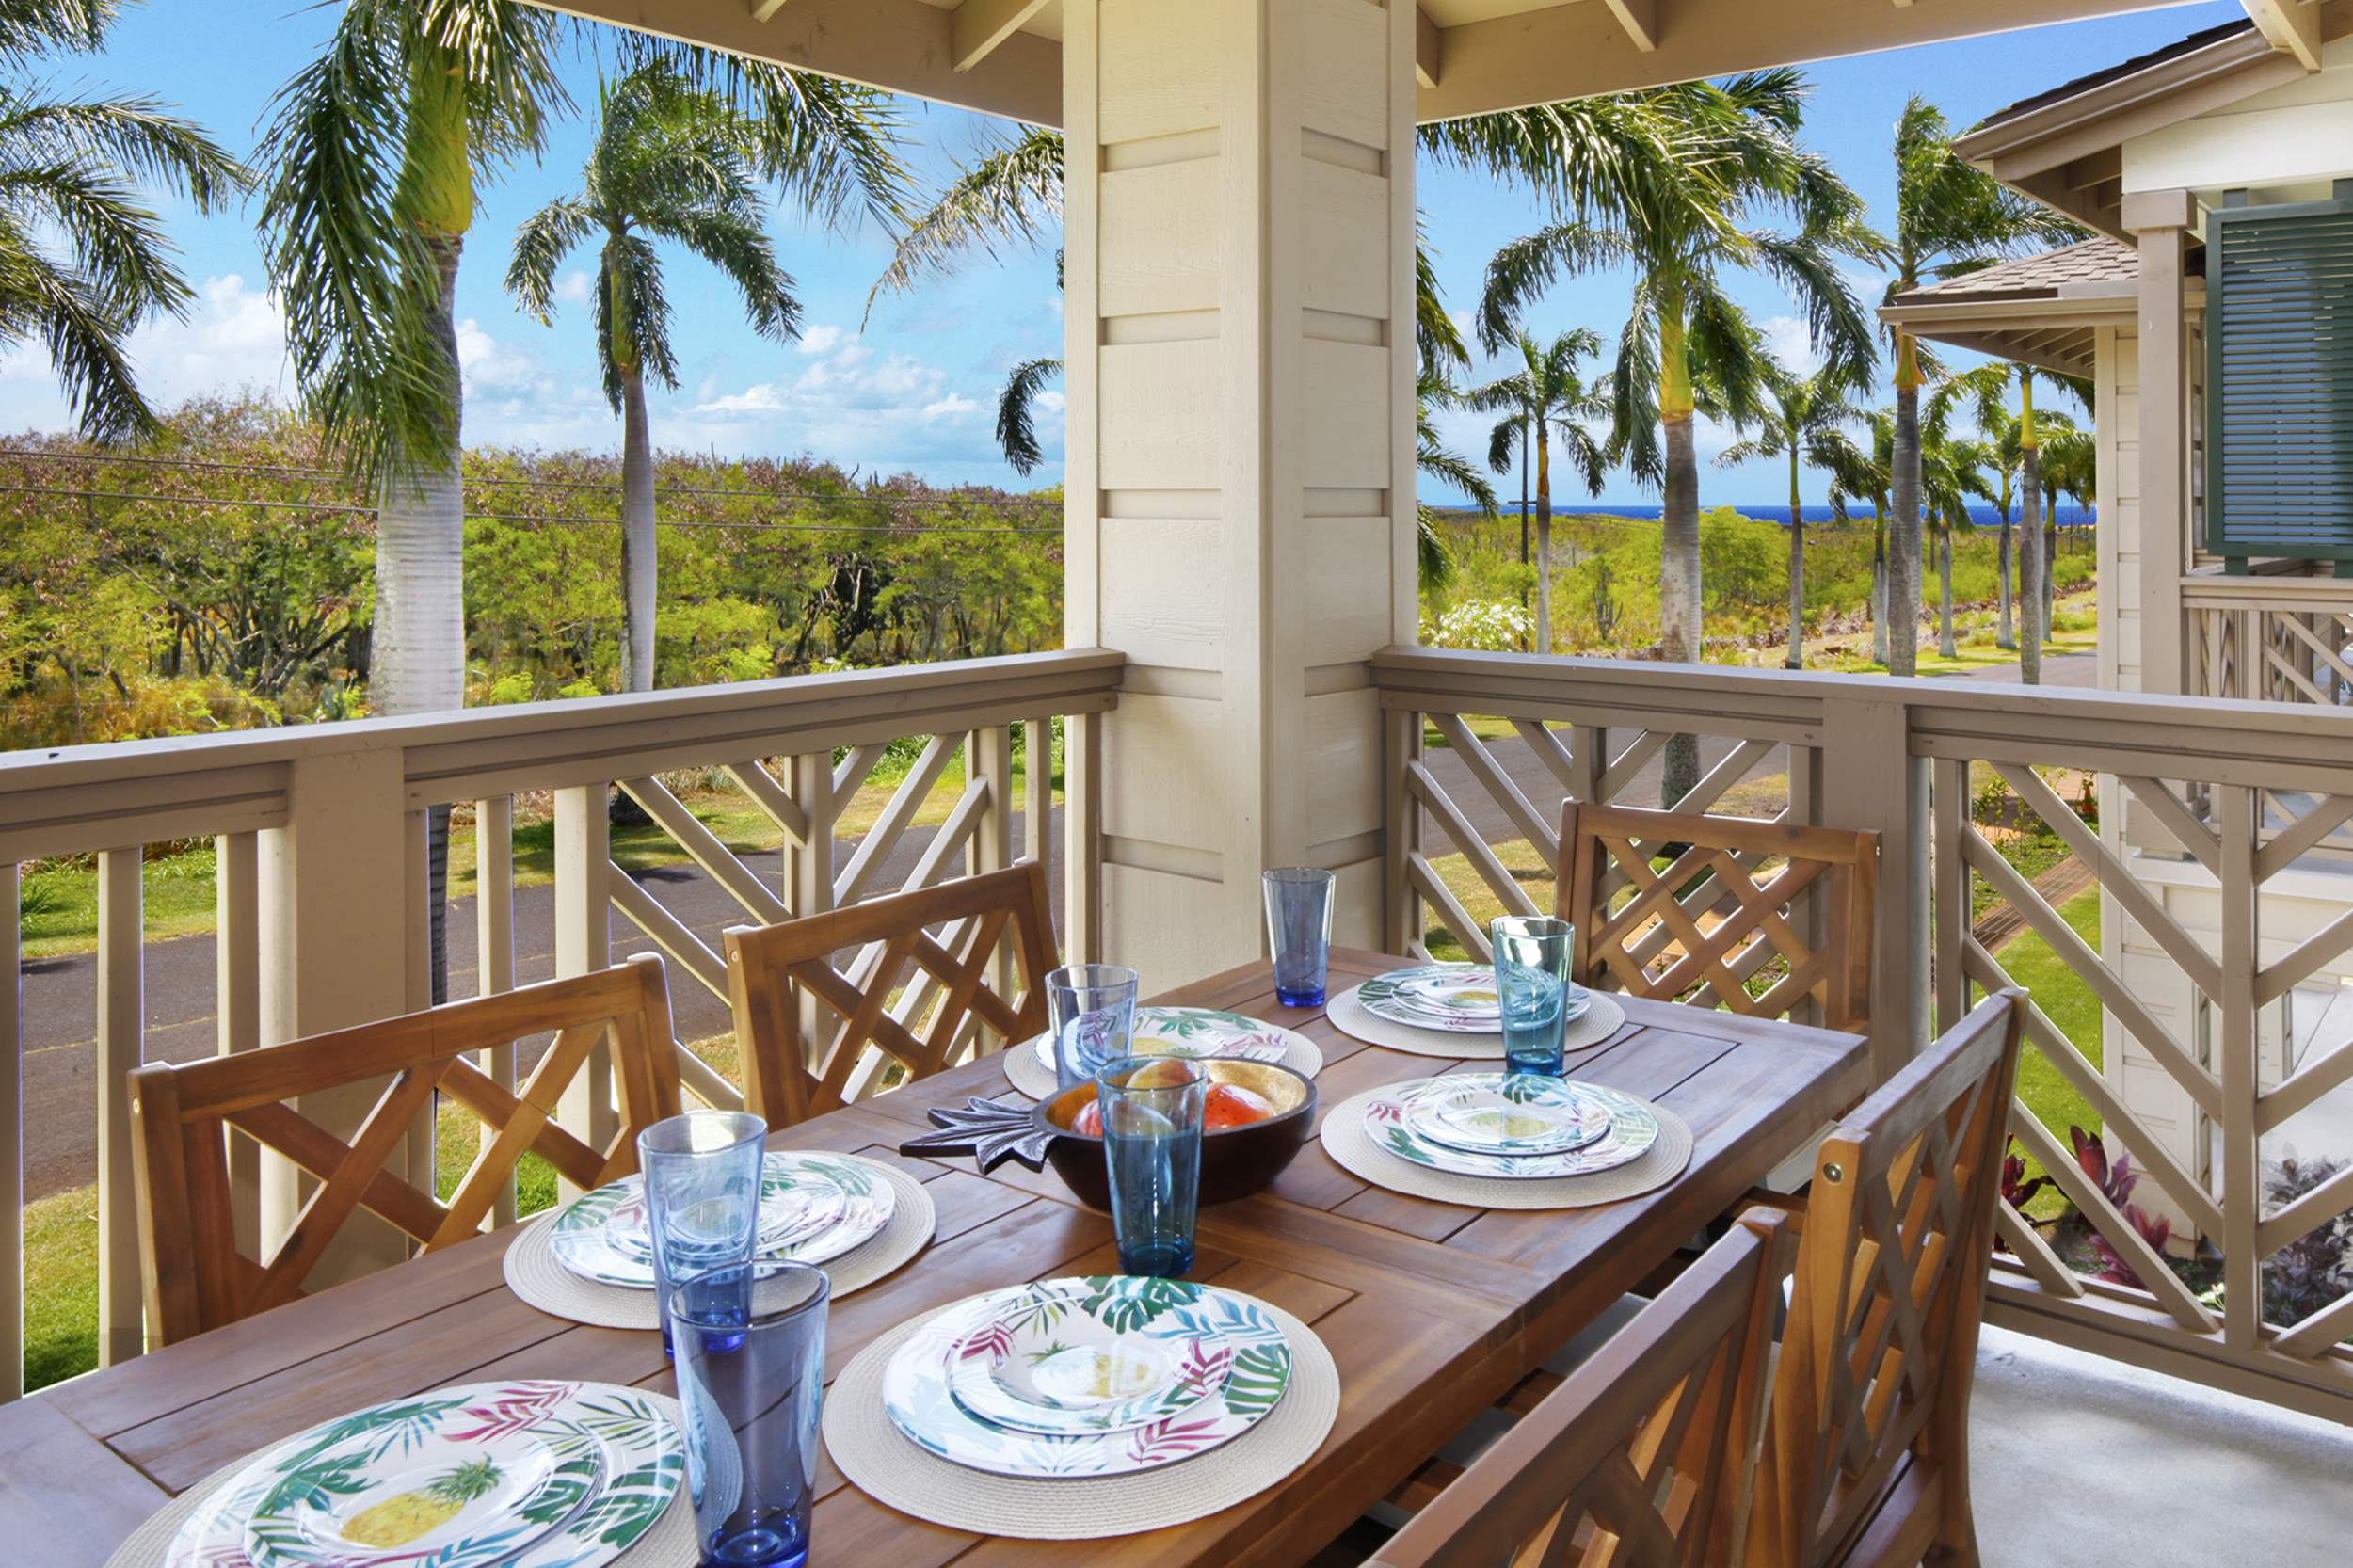 Private lanai with distant ocean and mountain views